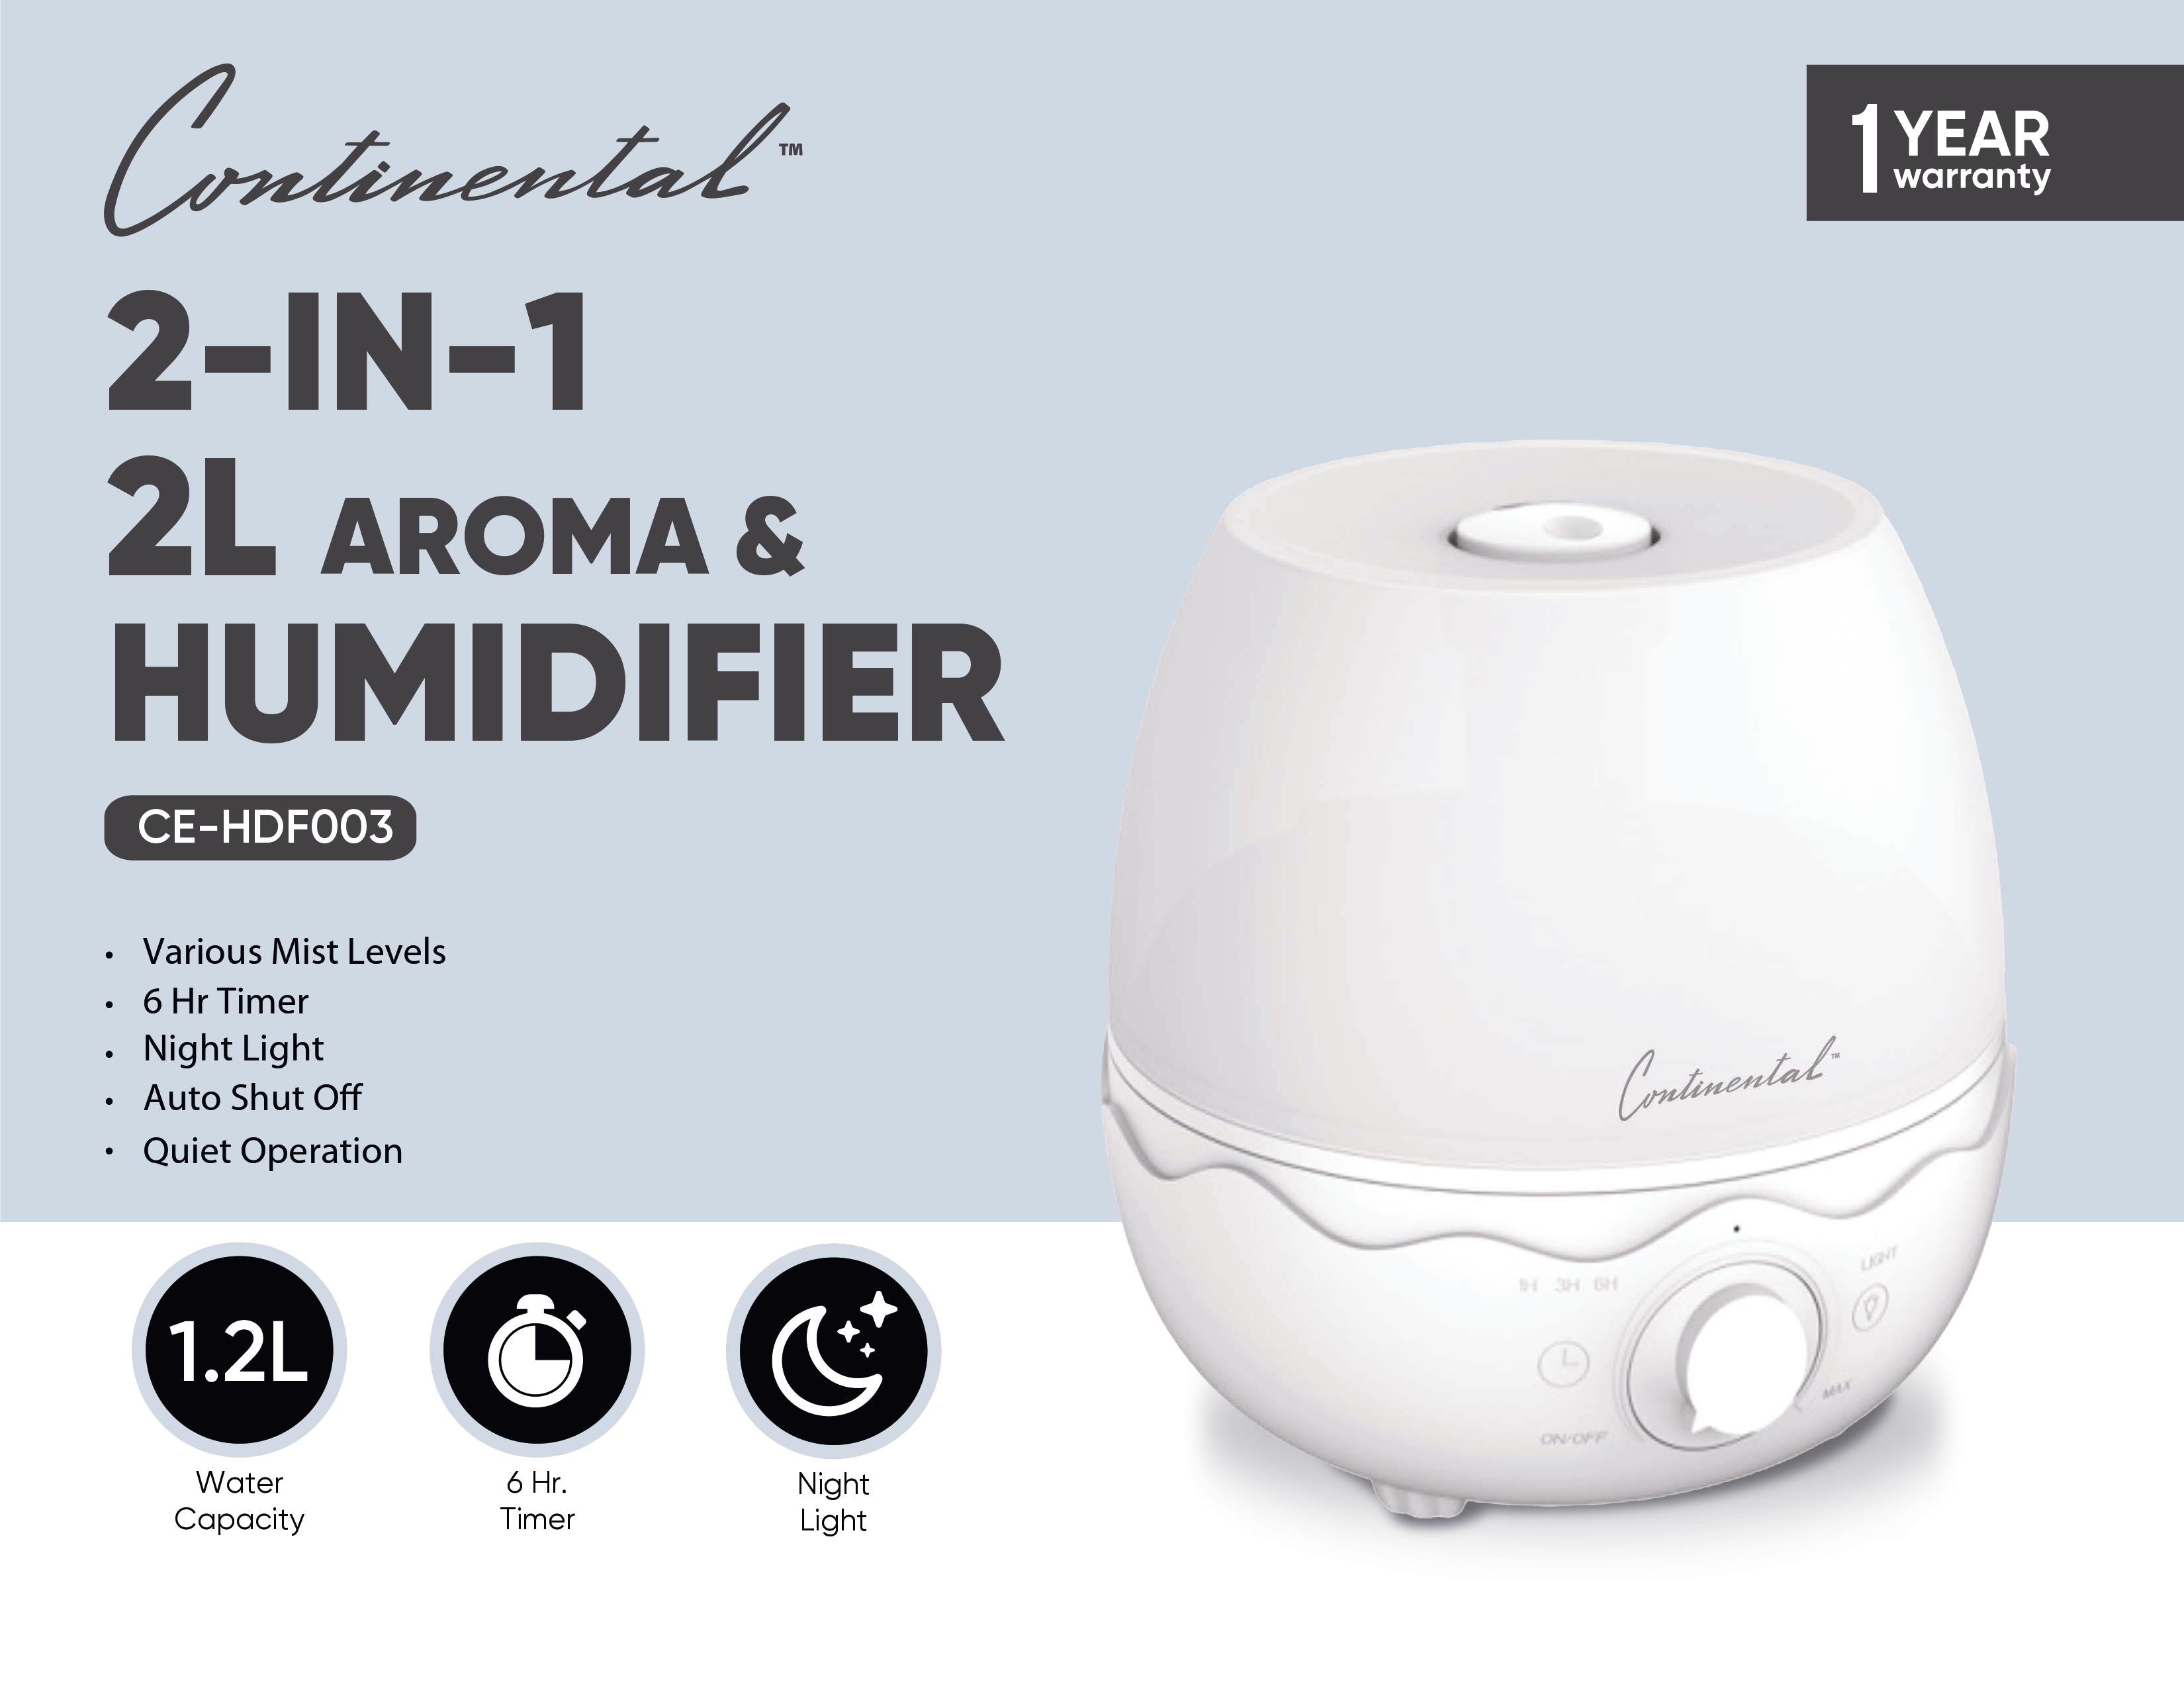 2-IN-1 AROMA & HUMIDIFIER